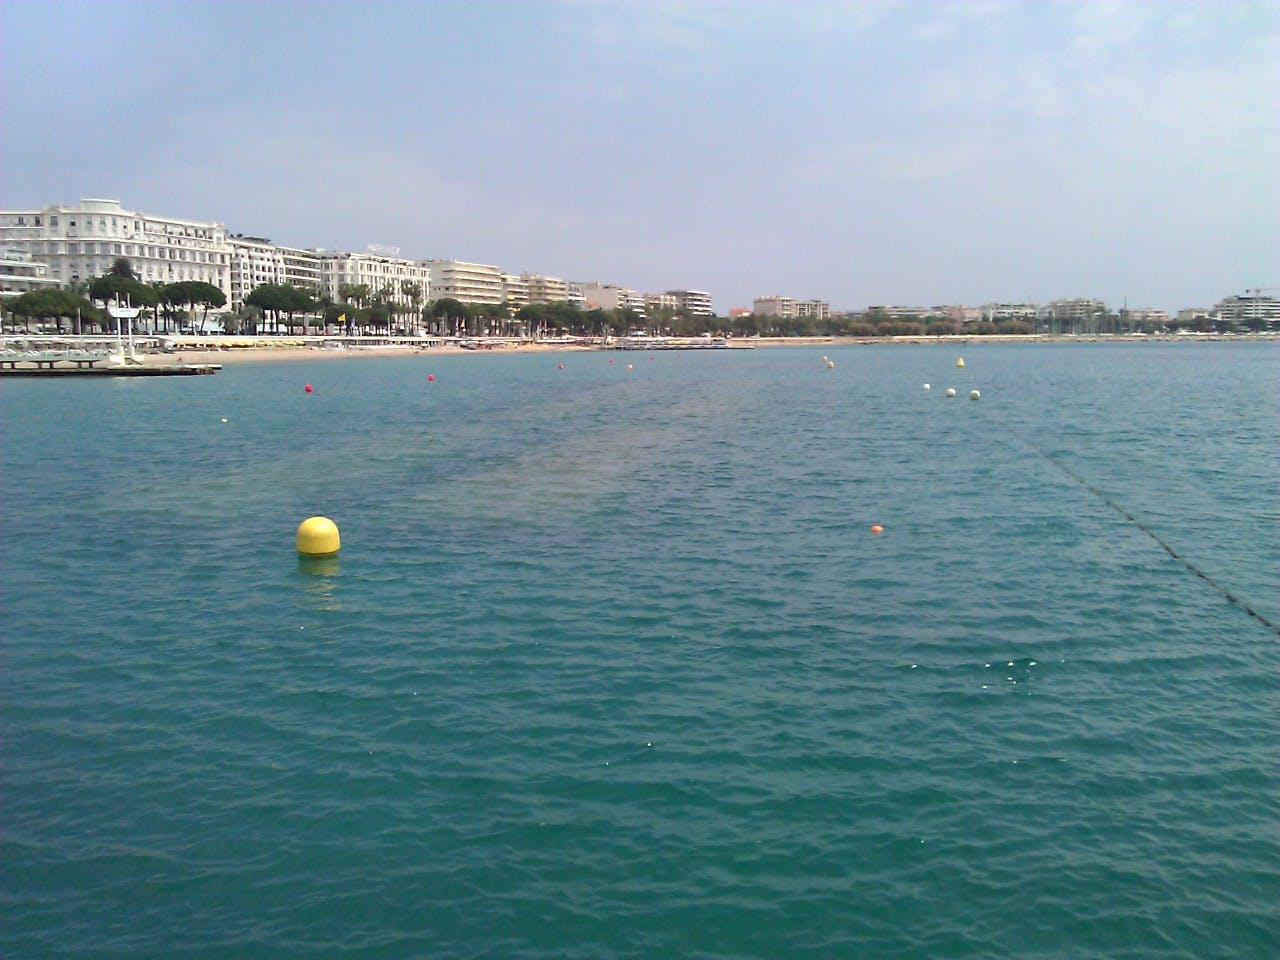 Coastal protection project featuring GEOTUBE systems at La Croisette beach in Cannes.